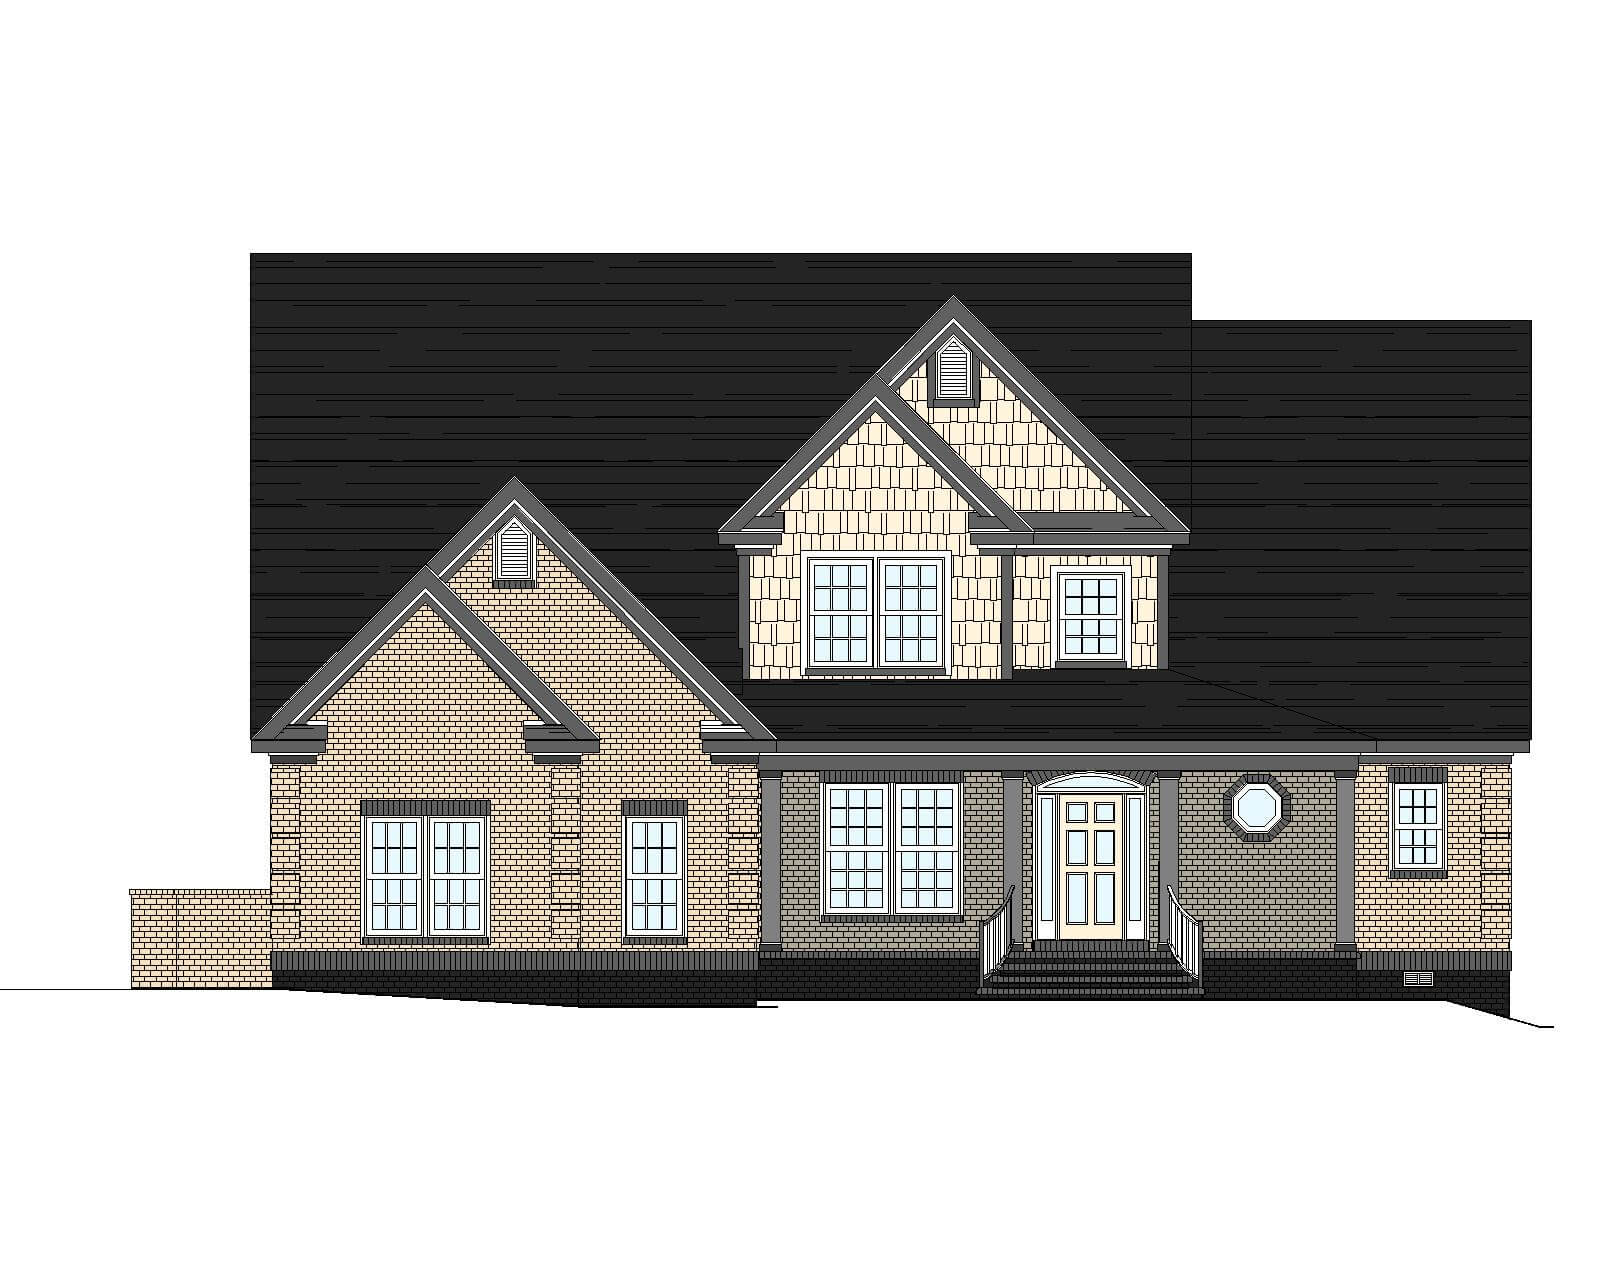 10 1079 My Home Floor Plans Front Elevation 